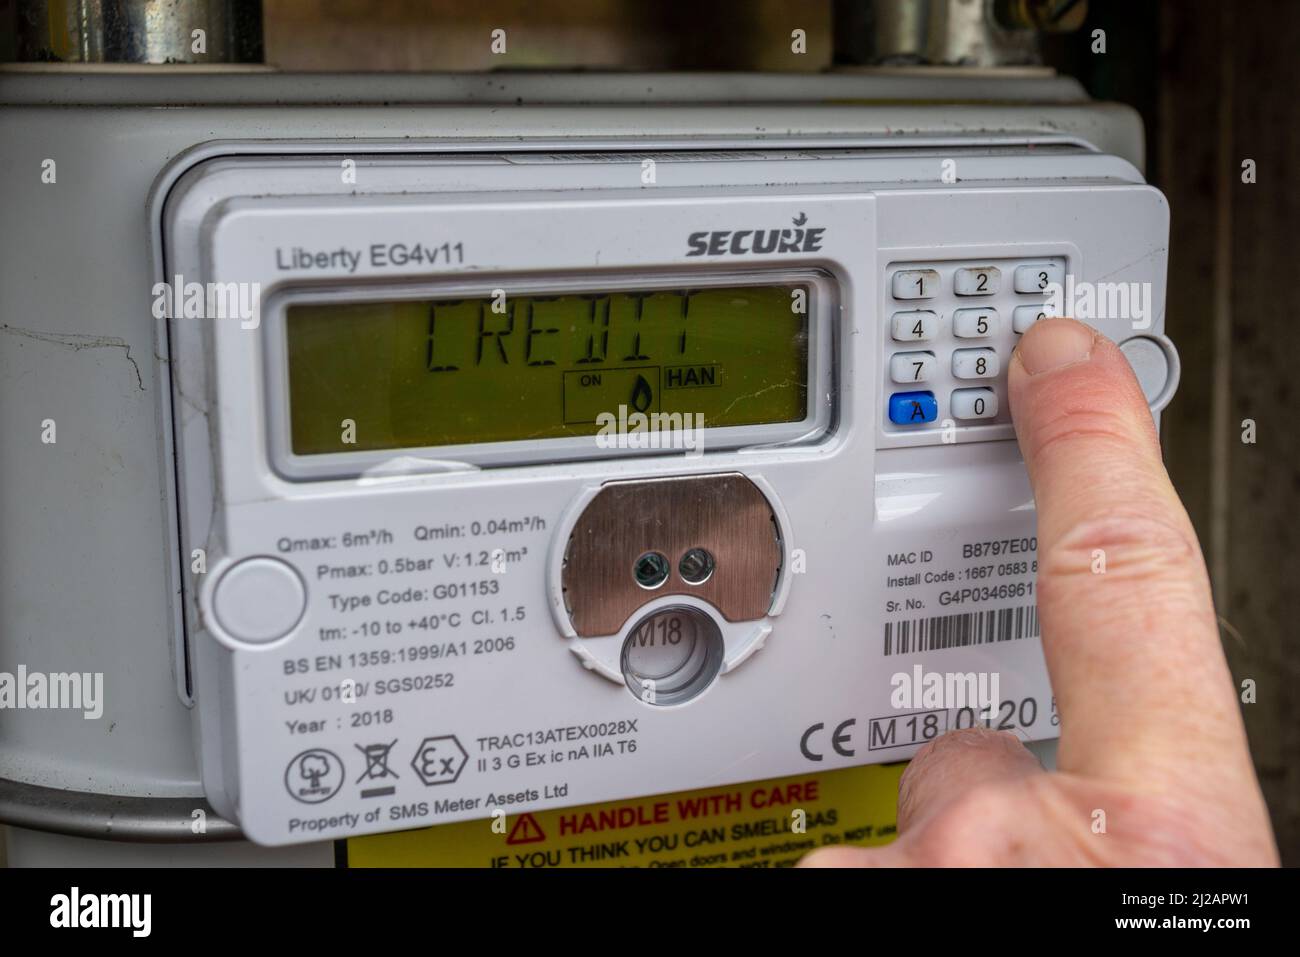 Southend on Sea, Essex, UK. 31st Mar, 2022. People in the UK are being advised to check their gas and electricity meter readings and upload them to their supplier’s websites if applicable to avoid being overcharged when the price cap increases tomorrow, the 1st April. Gas meter being checked. Credit message Stock Photo